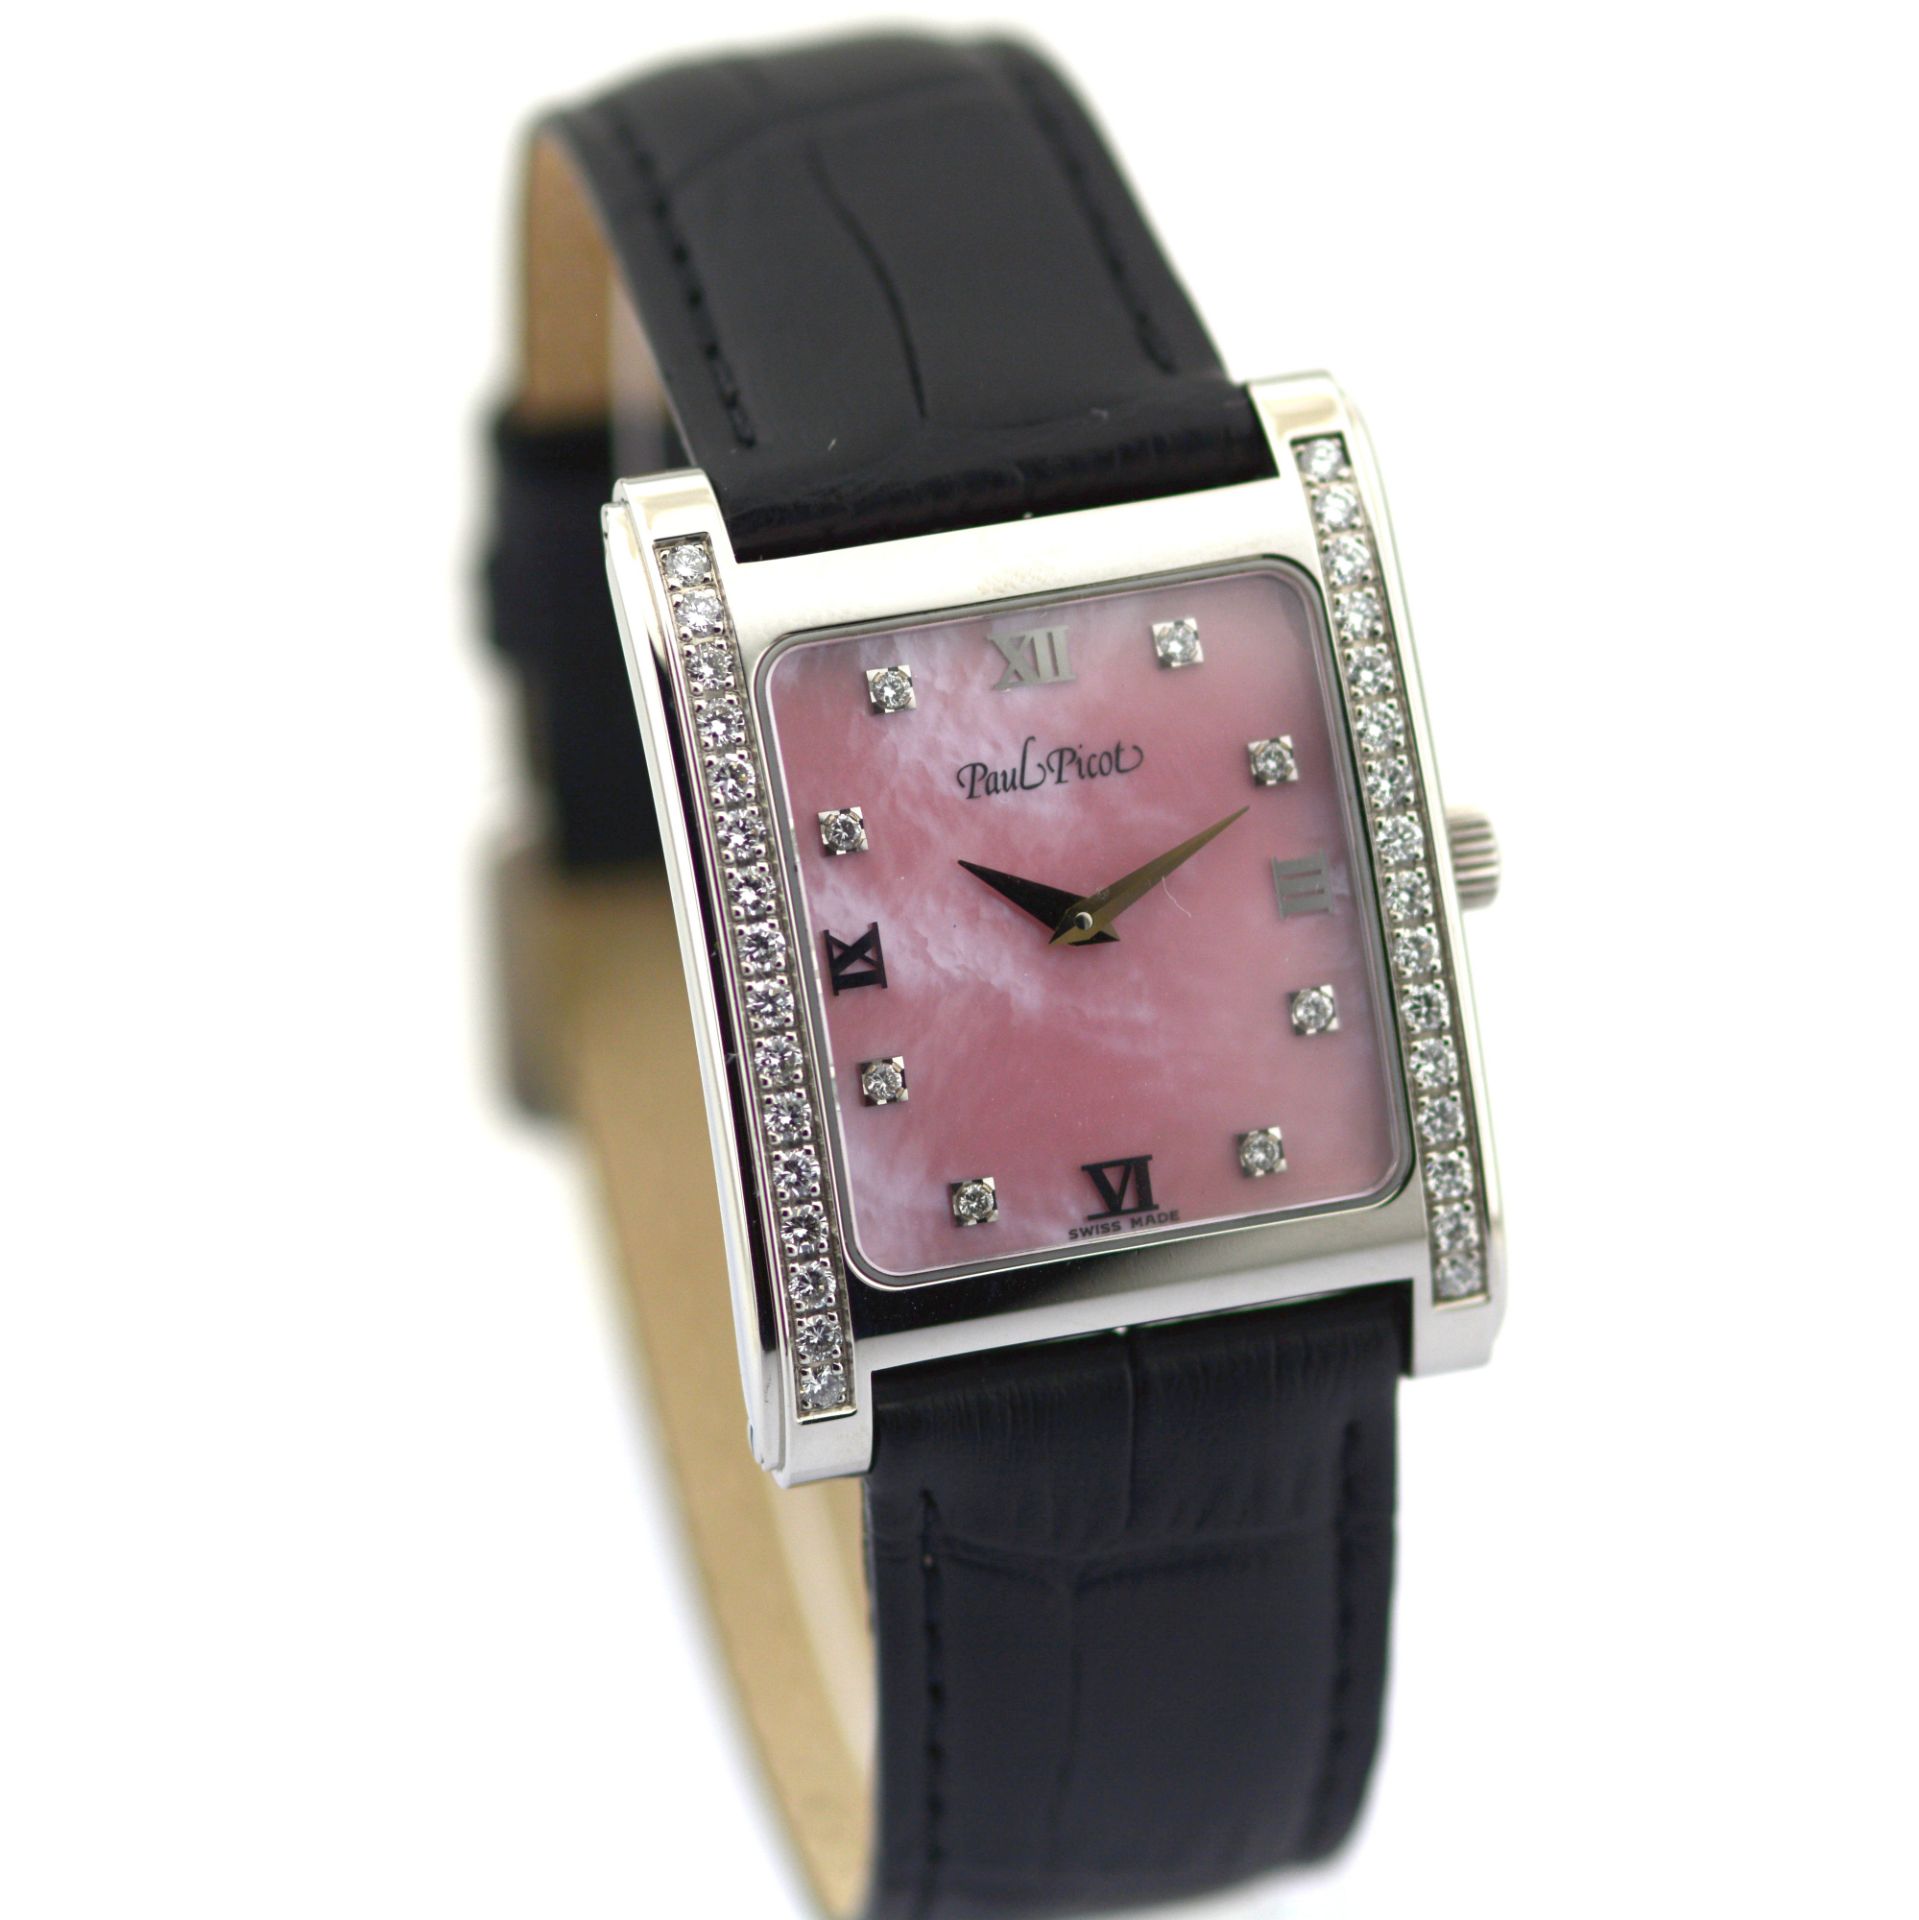 Paul Picot / 4079 Diamond Dial Diamond Case Mother of pearl - Lady's Steel Wrist Watch - Image 5 of 12